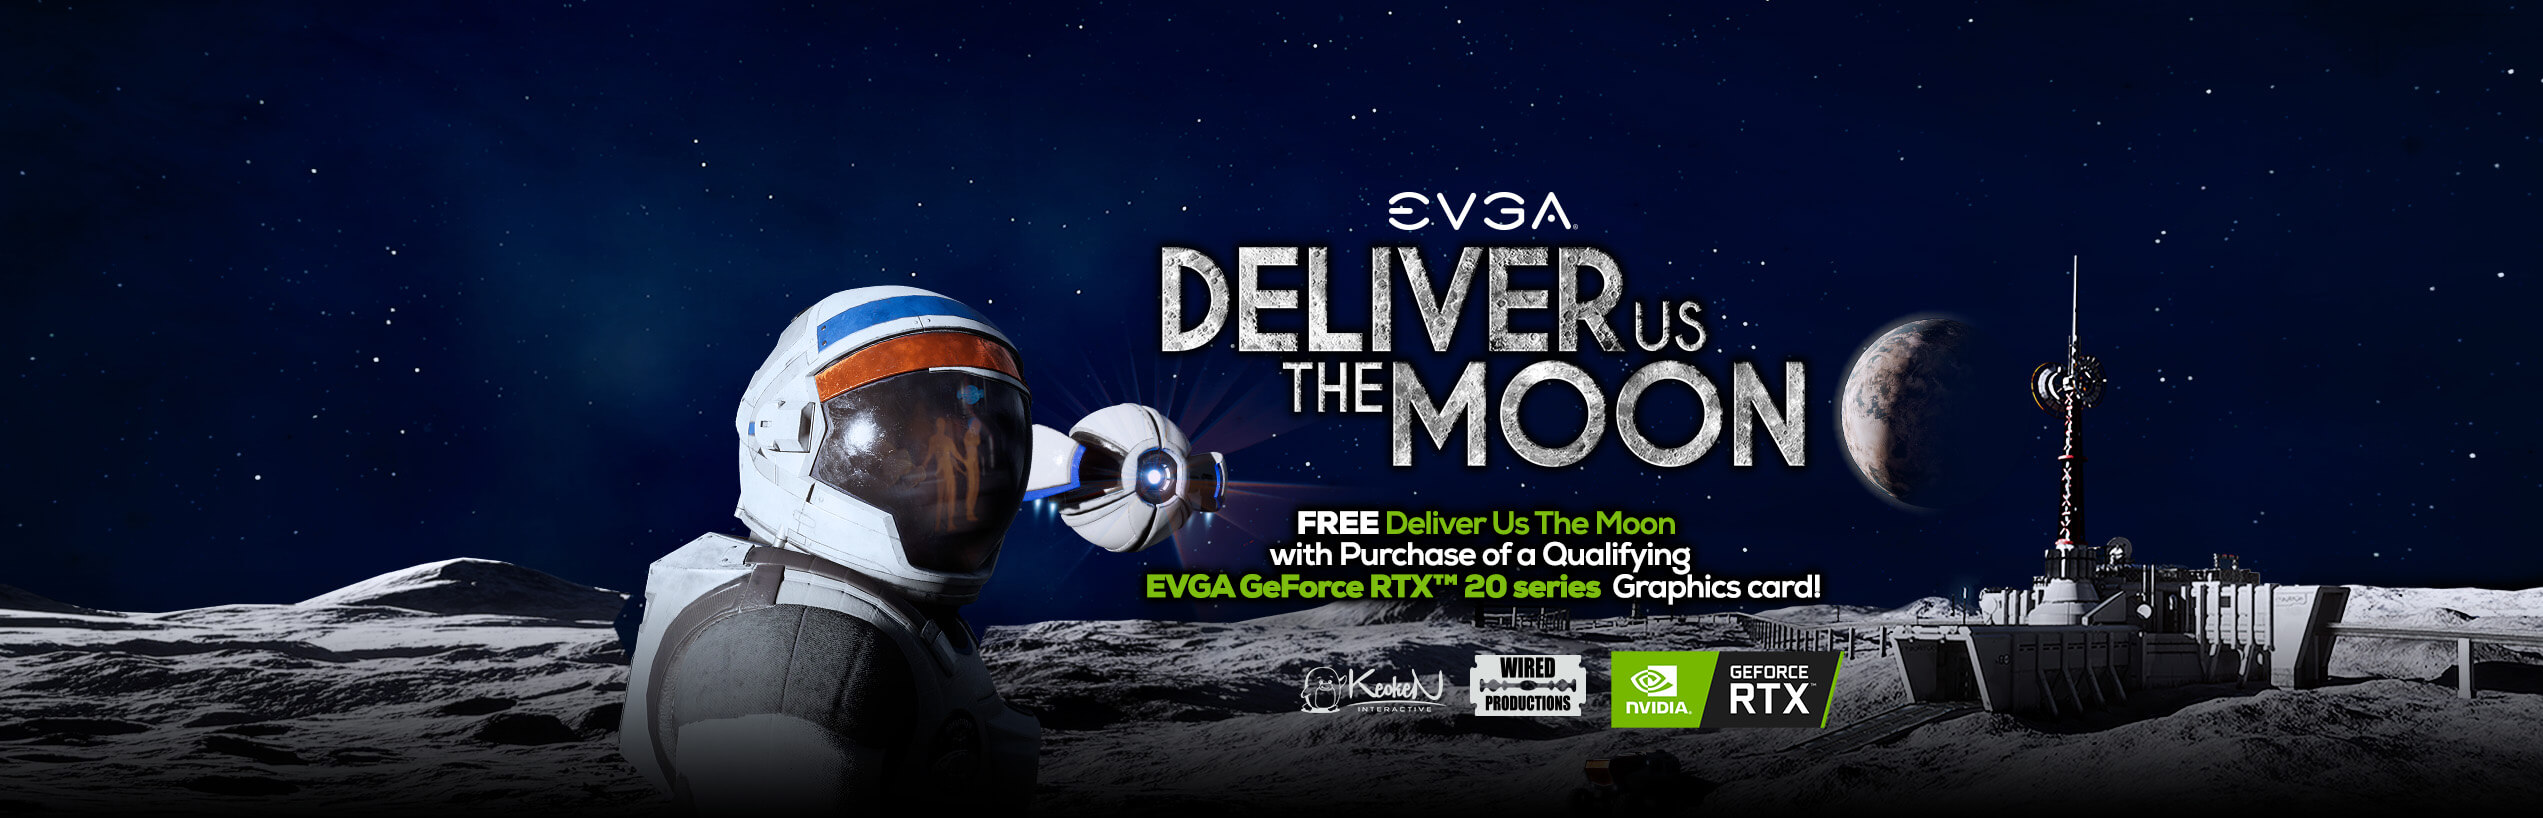 EVGA x DELIVER US THE MOON